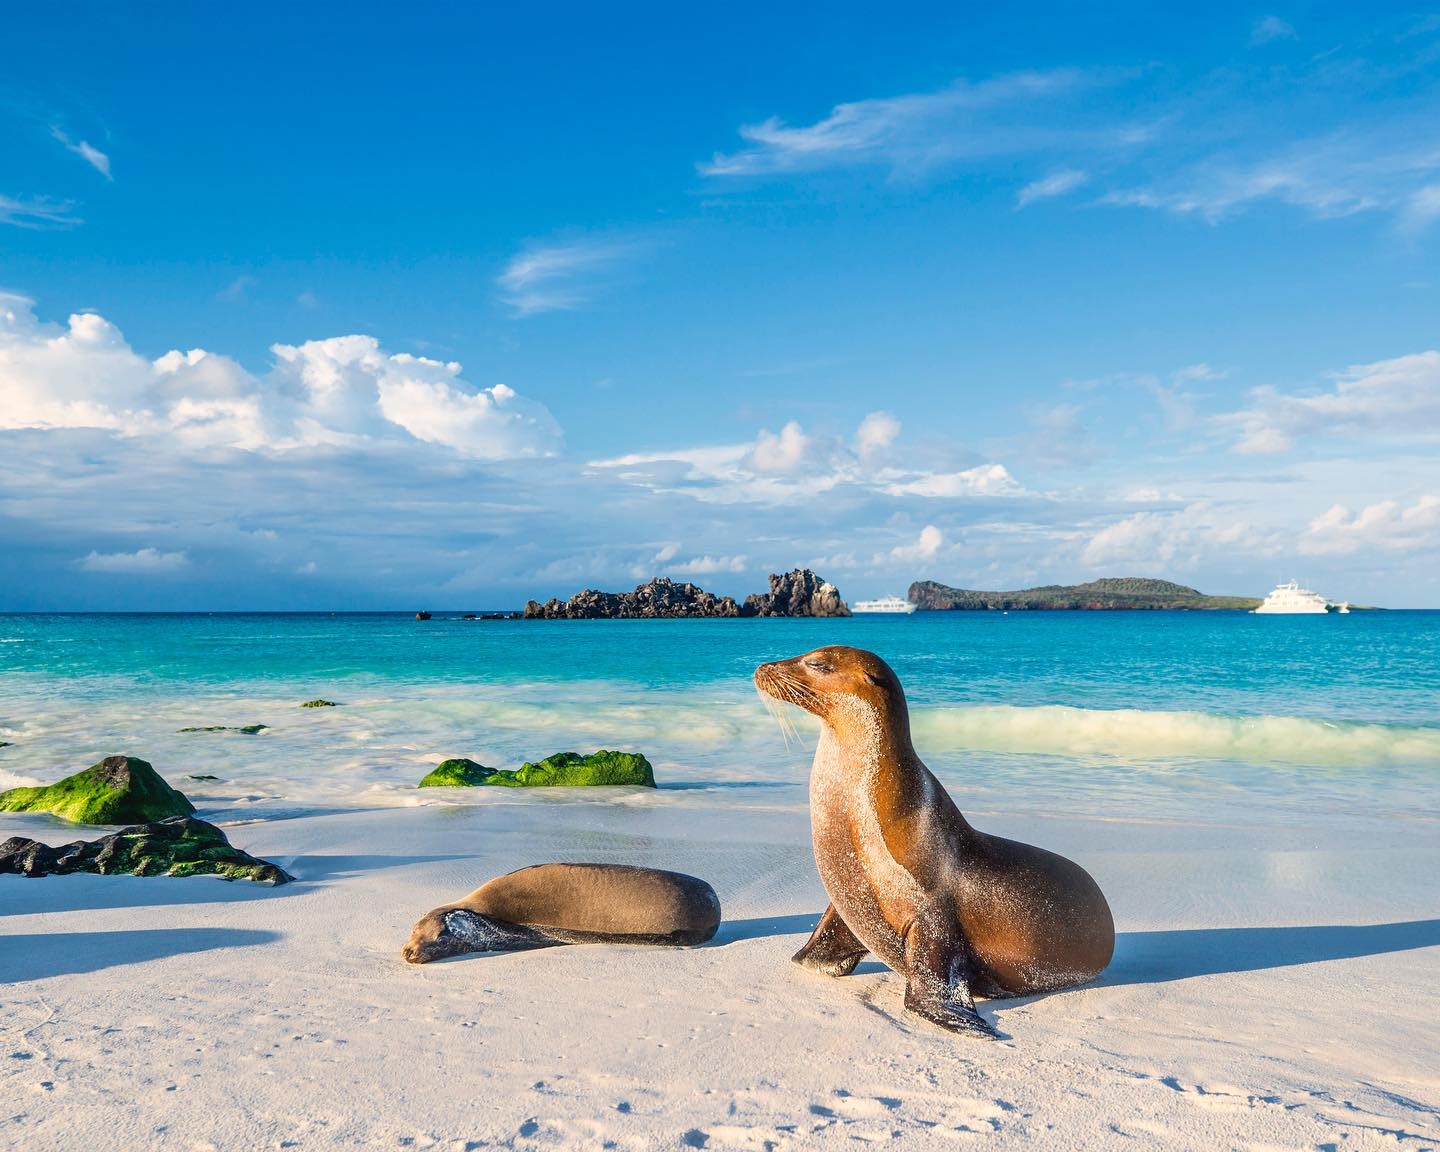 Galapagos: Snorkel with sea lions, hike volcanic landscapes, witness giant tortoises, and marvel at unique wildlife found nowhere else on Earth.